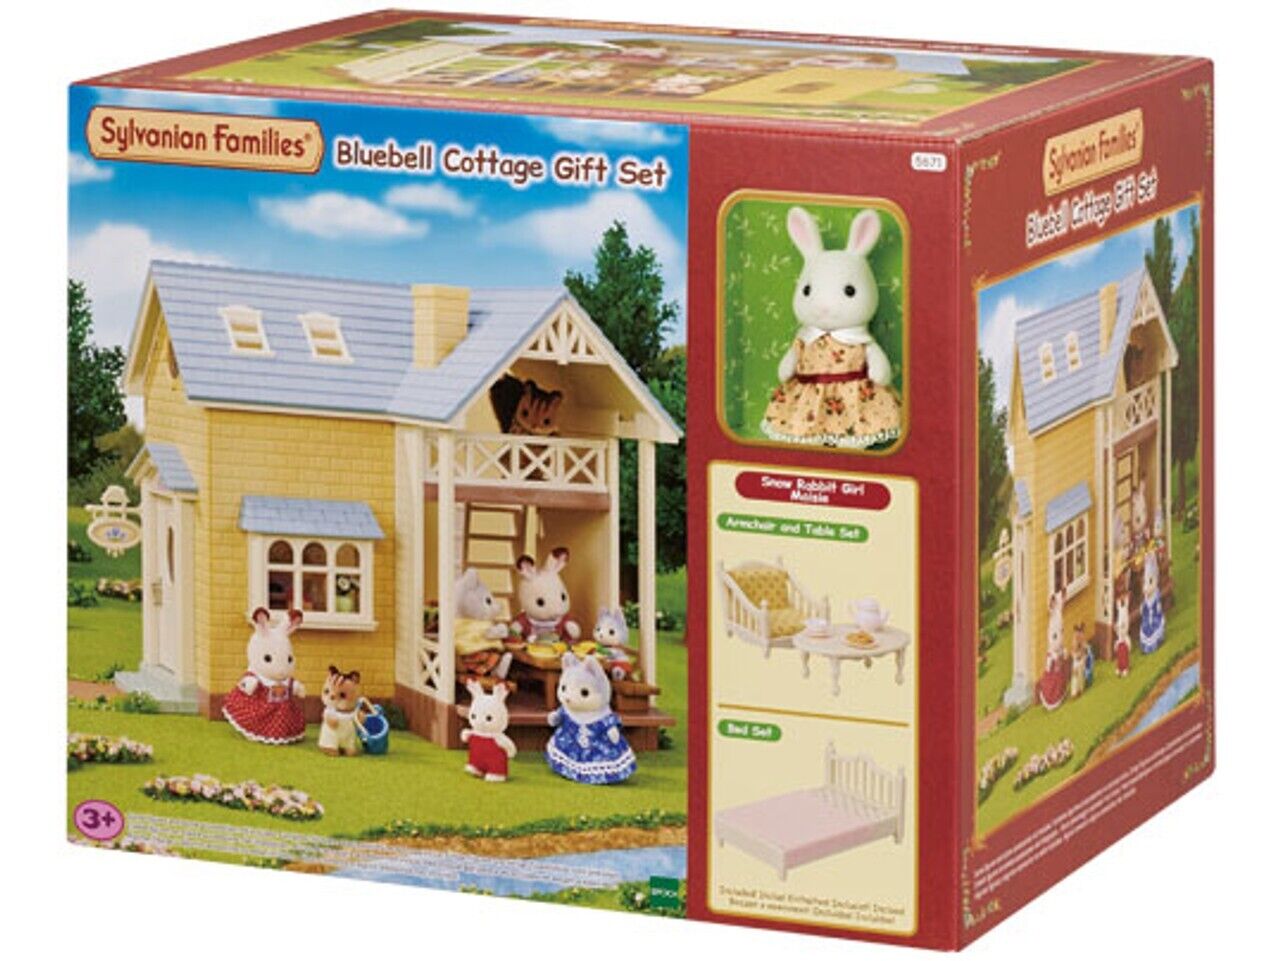 Calico Critters Bluebell Cottage Gift Set, NEW and MINT